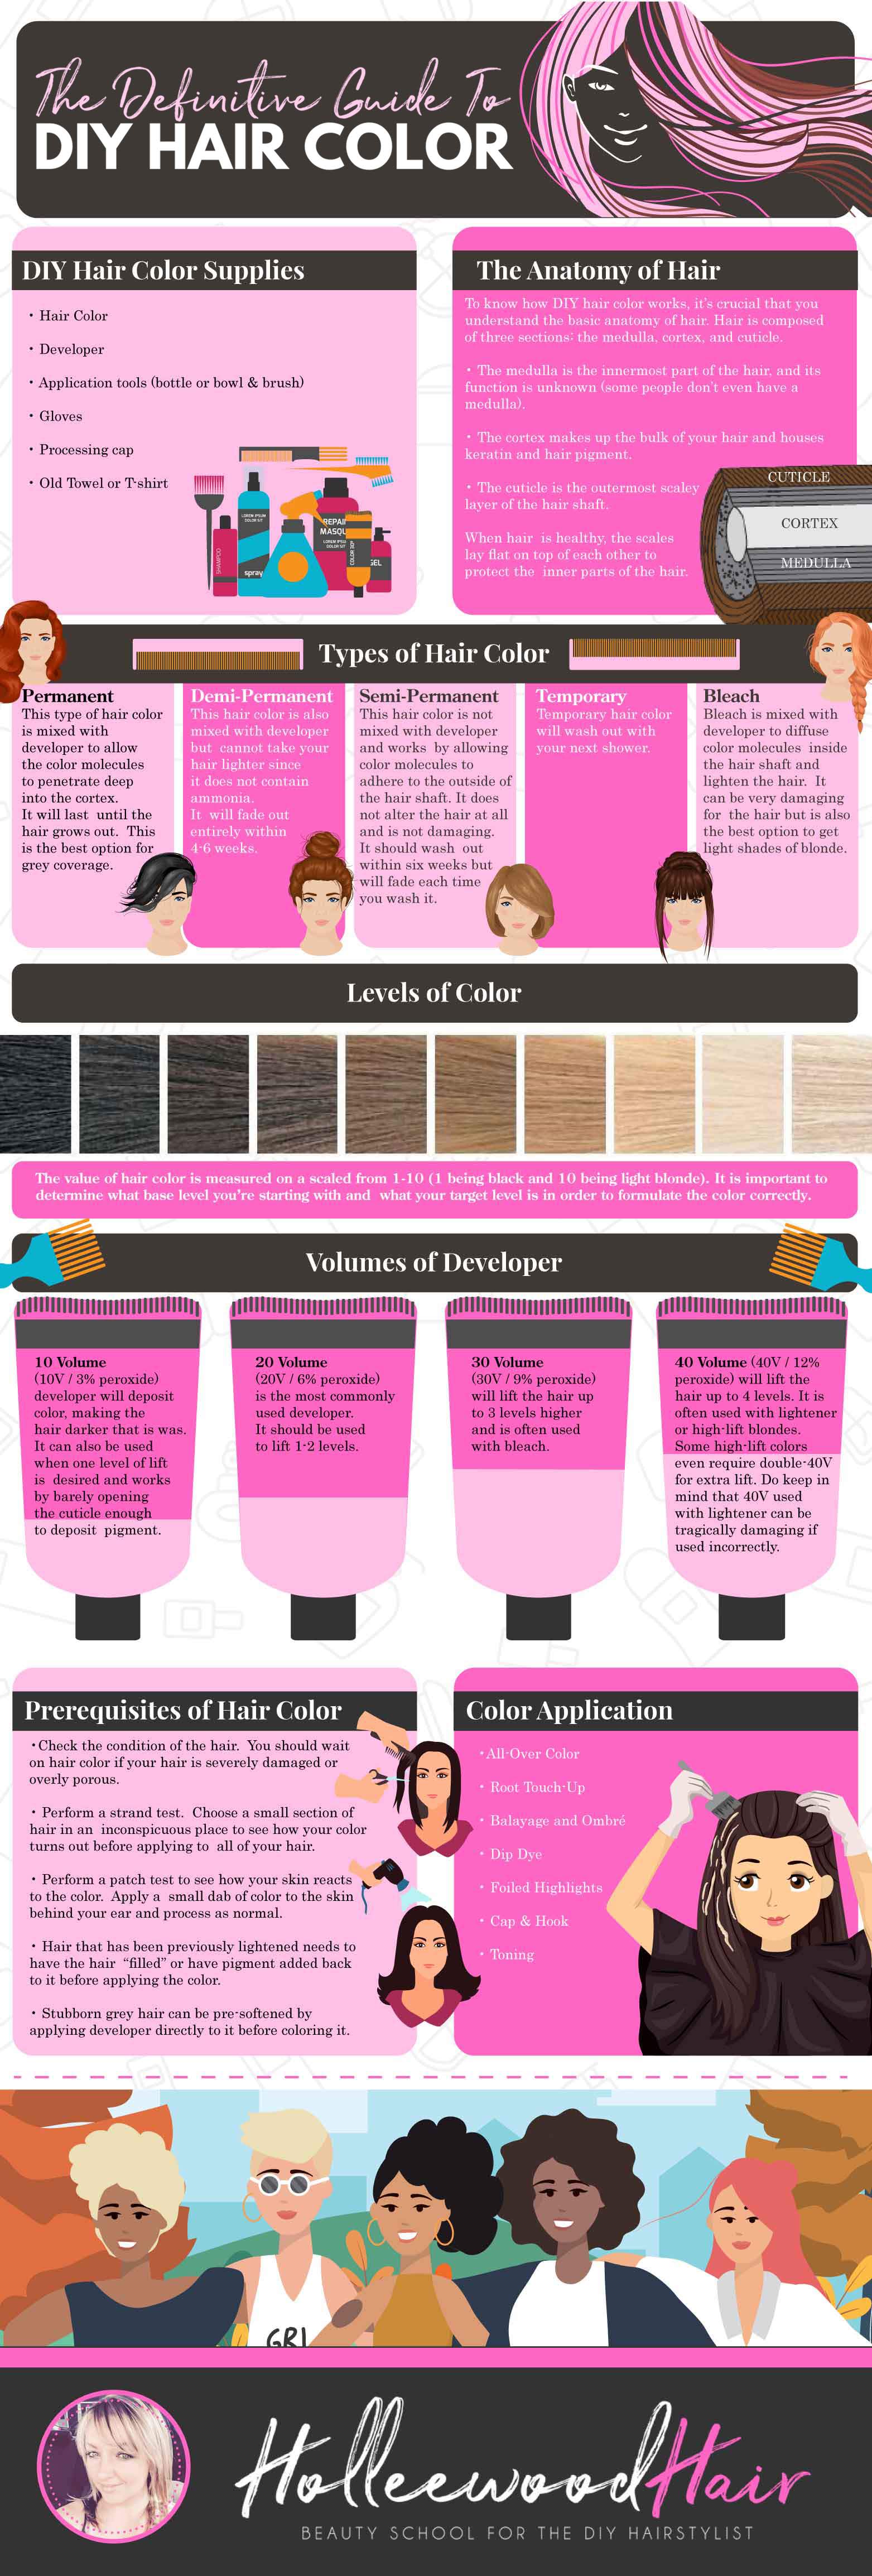 DIY Hair Color #infographic